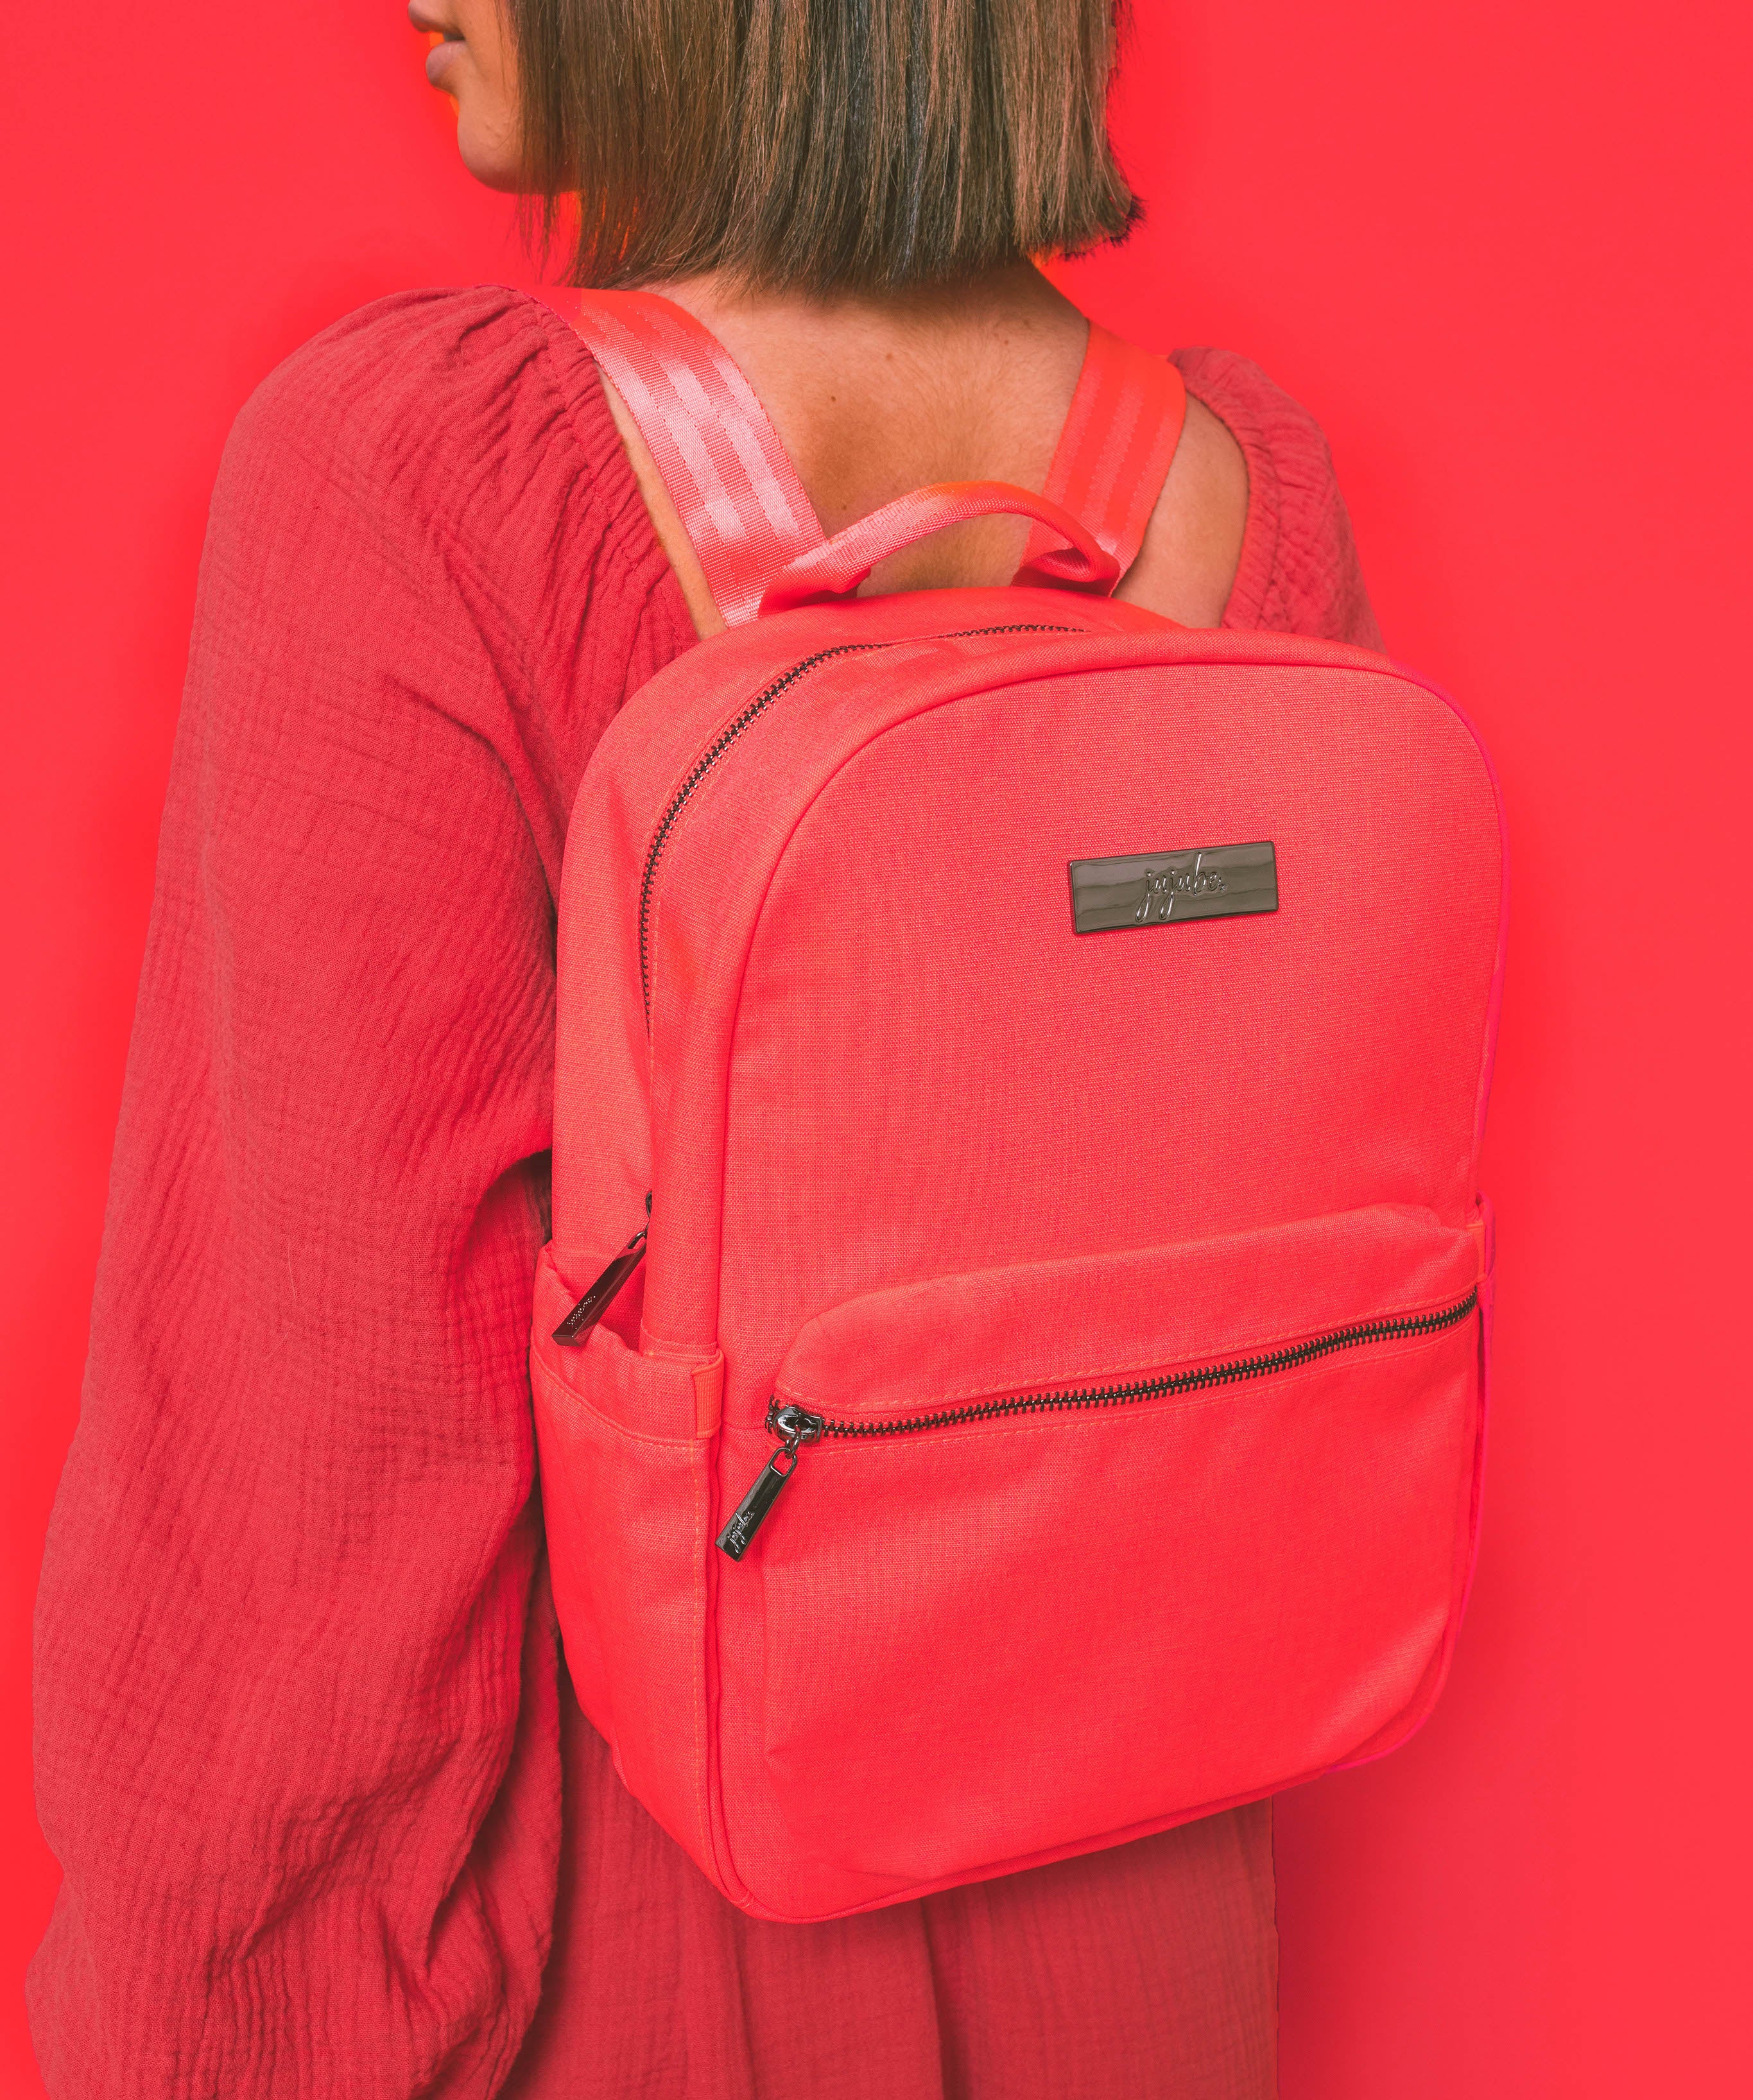 Neon Coral Pink Midi Backpack Worn by Woman wearing a matching color dress